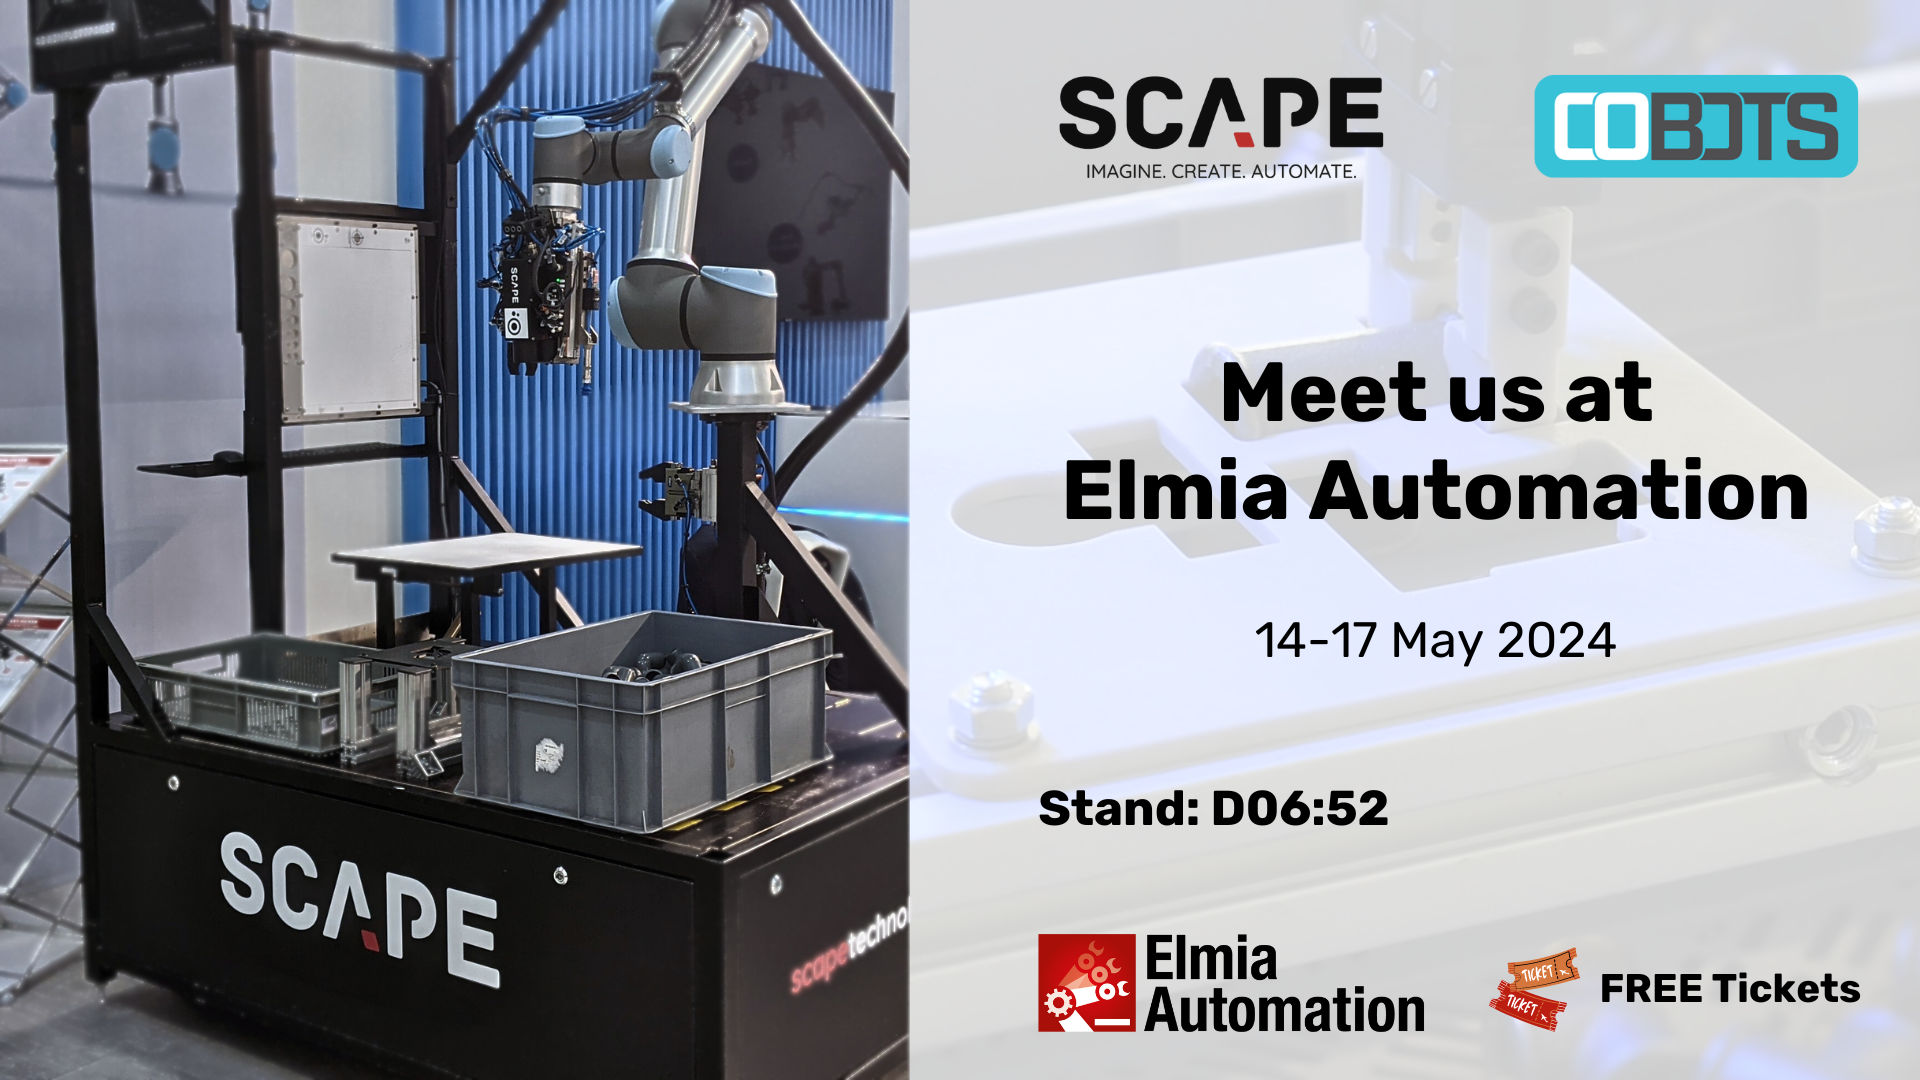 Meet Scape Technologies and Cobots Sweden at Elmia Automation 2024 trade show for industrial automation as they showcase the SCAPE Mini-Picker